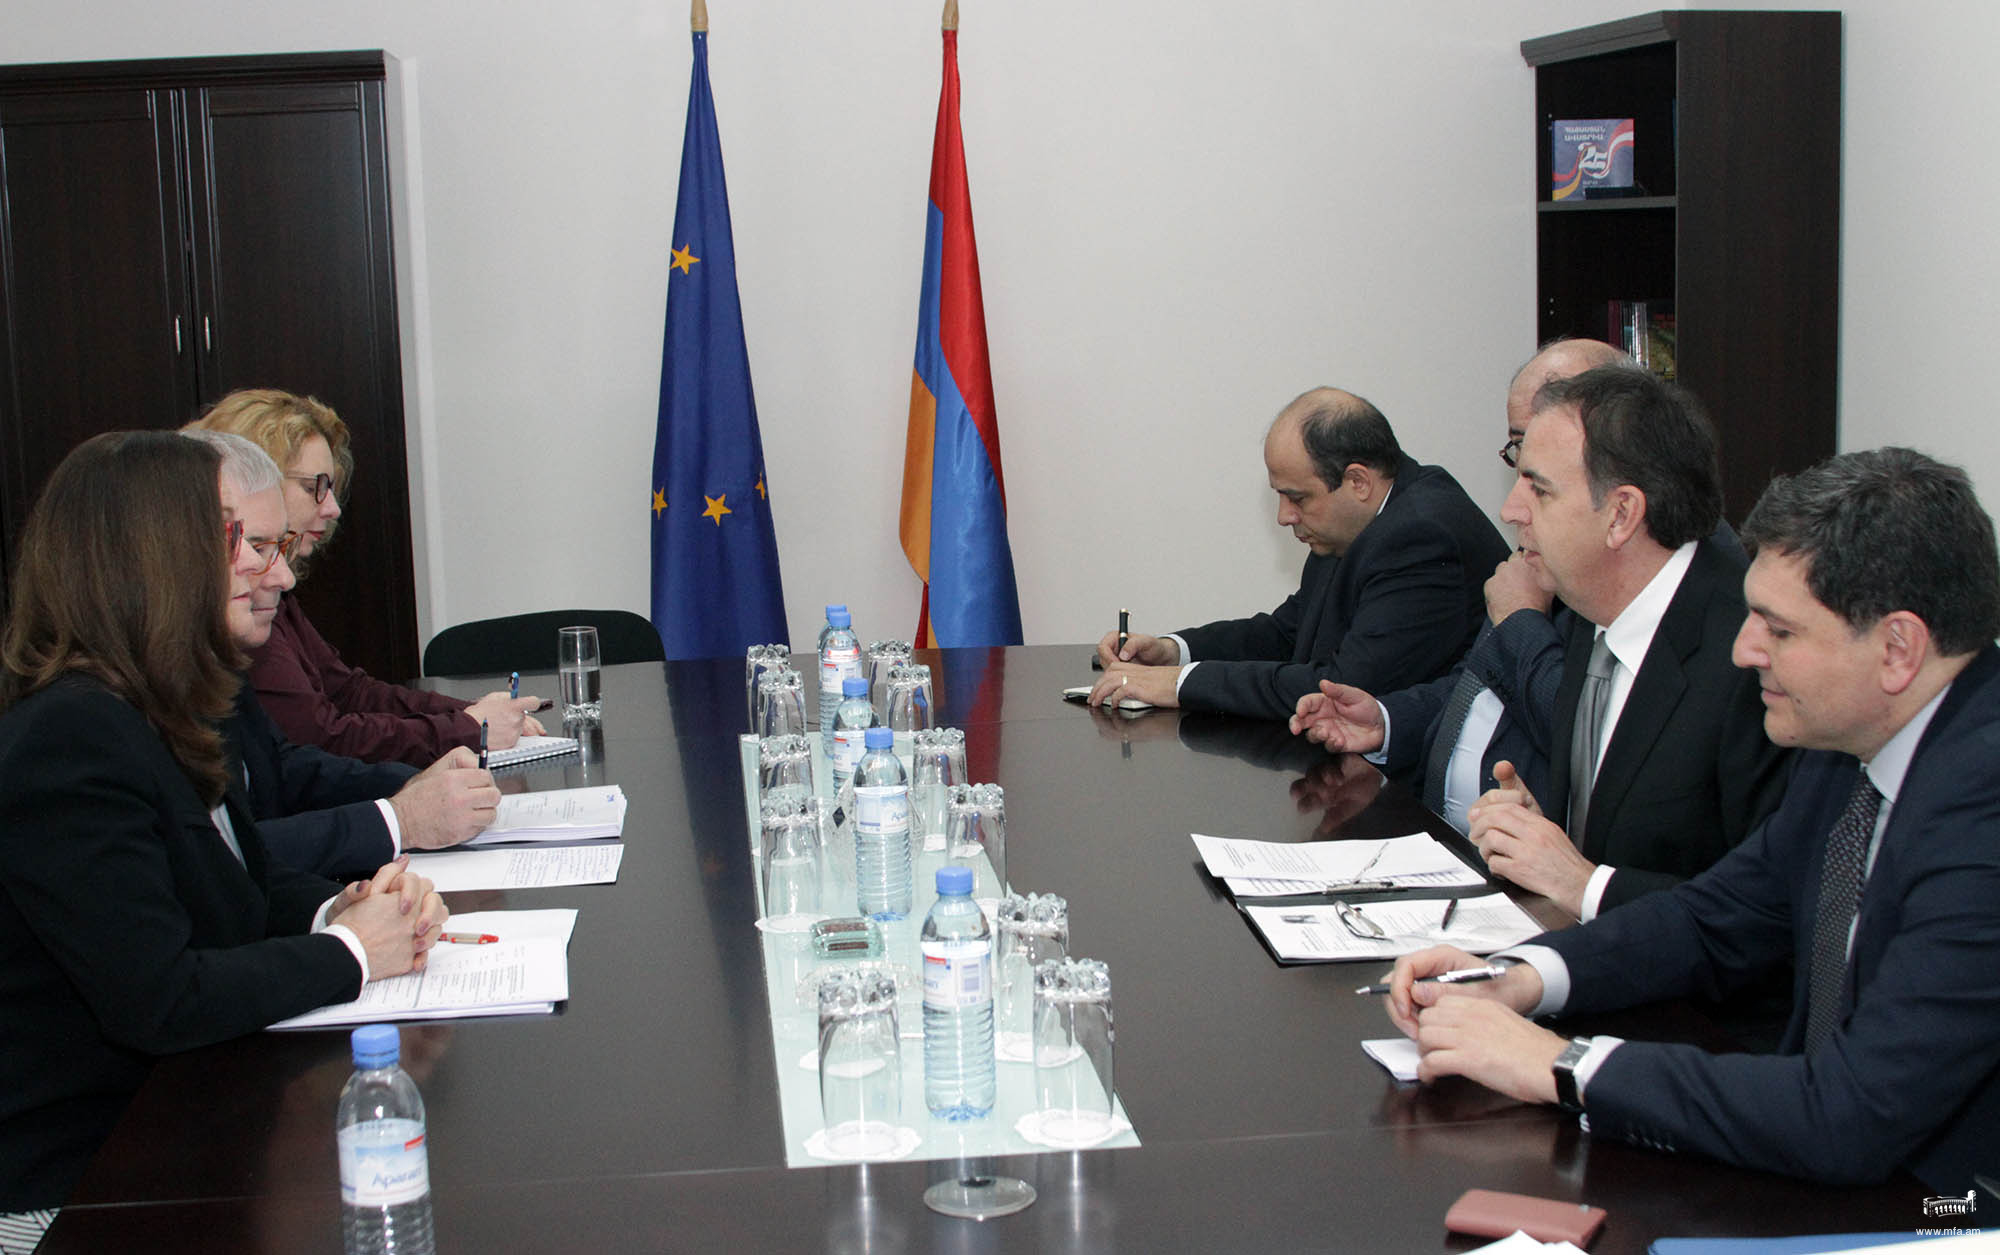 CoE Congress President visited Foreign Ministry of Armenia